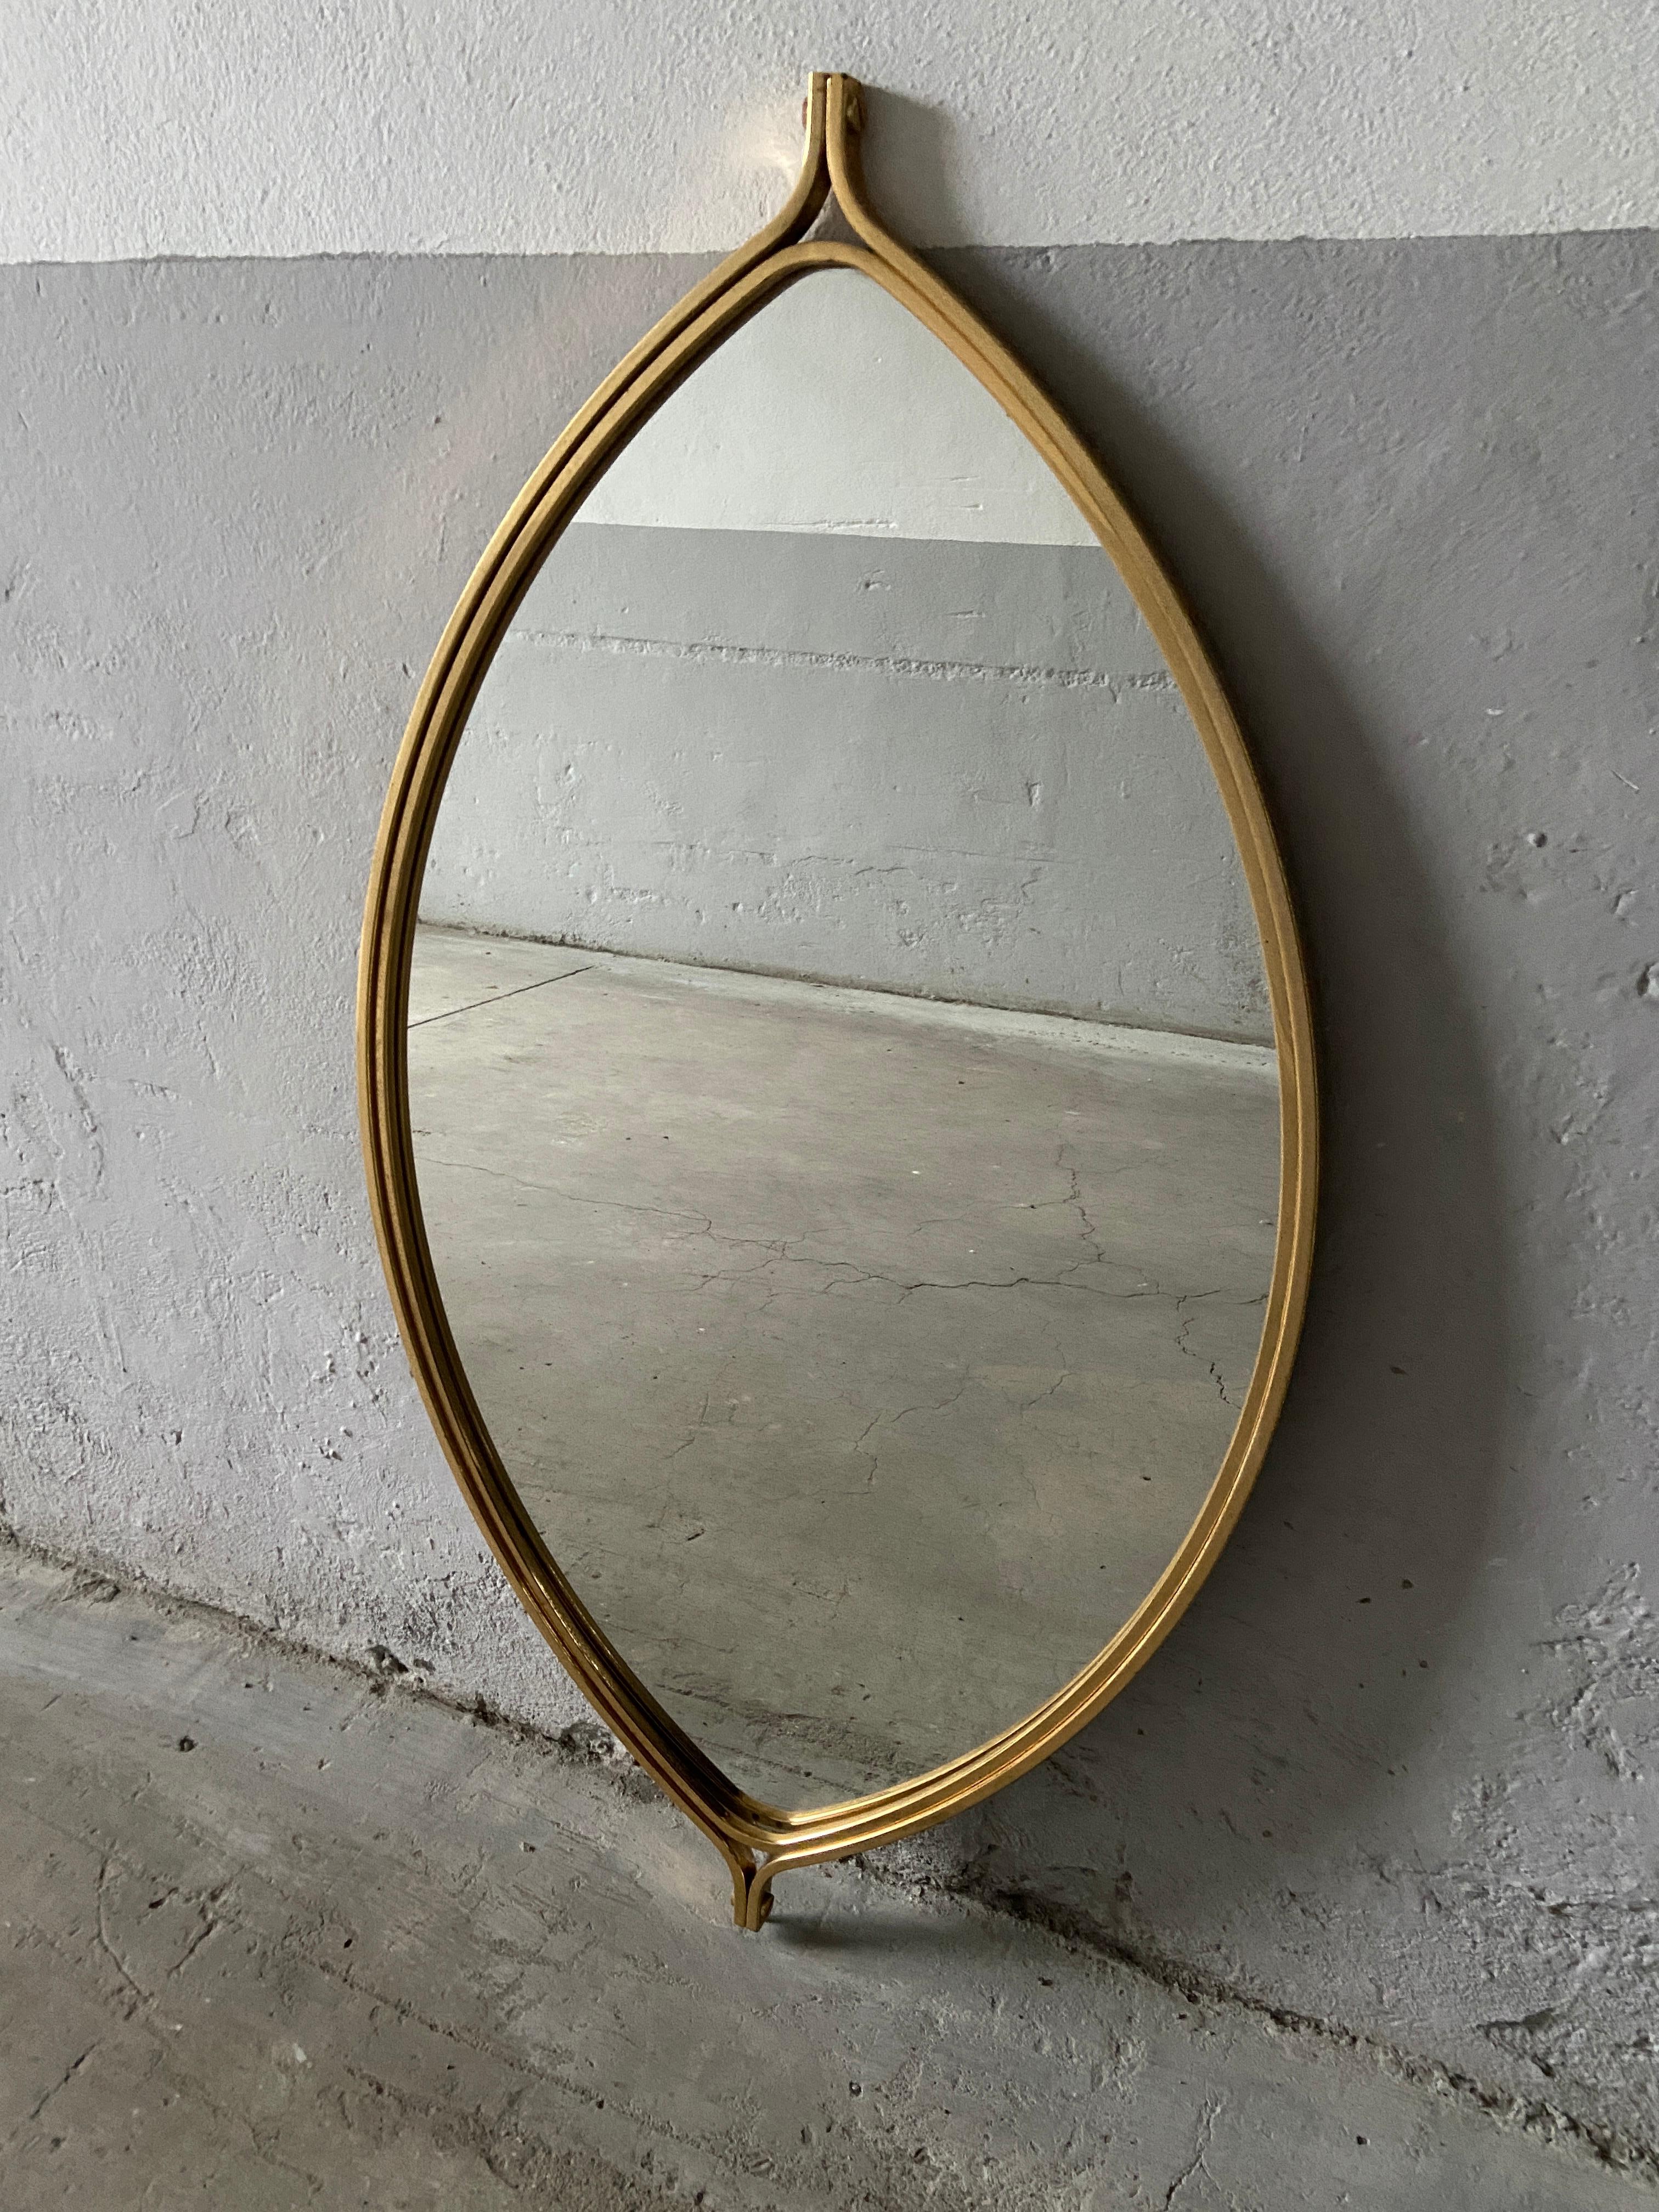 Mid-Century Modern Italian gilt metal eye shaped wall mirror.
The mirror has a loop to be hung vertical, but it can be easily hung horizontal.